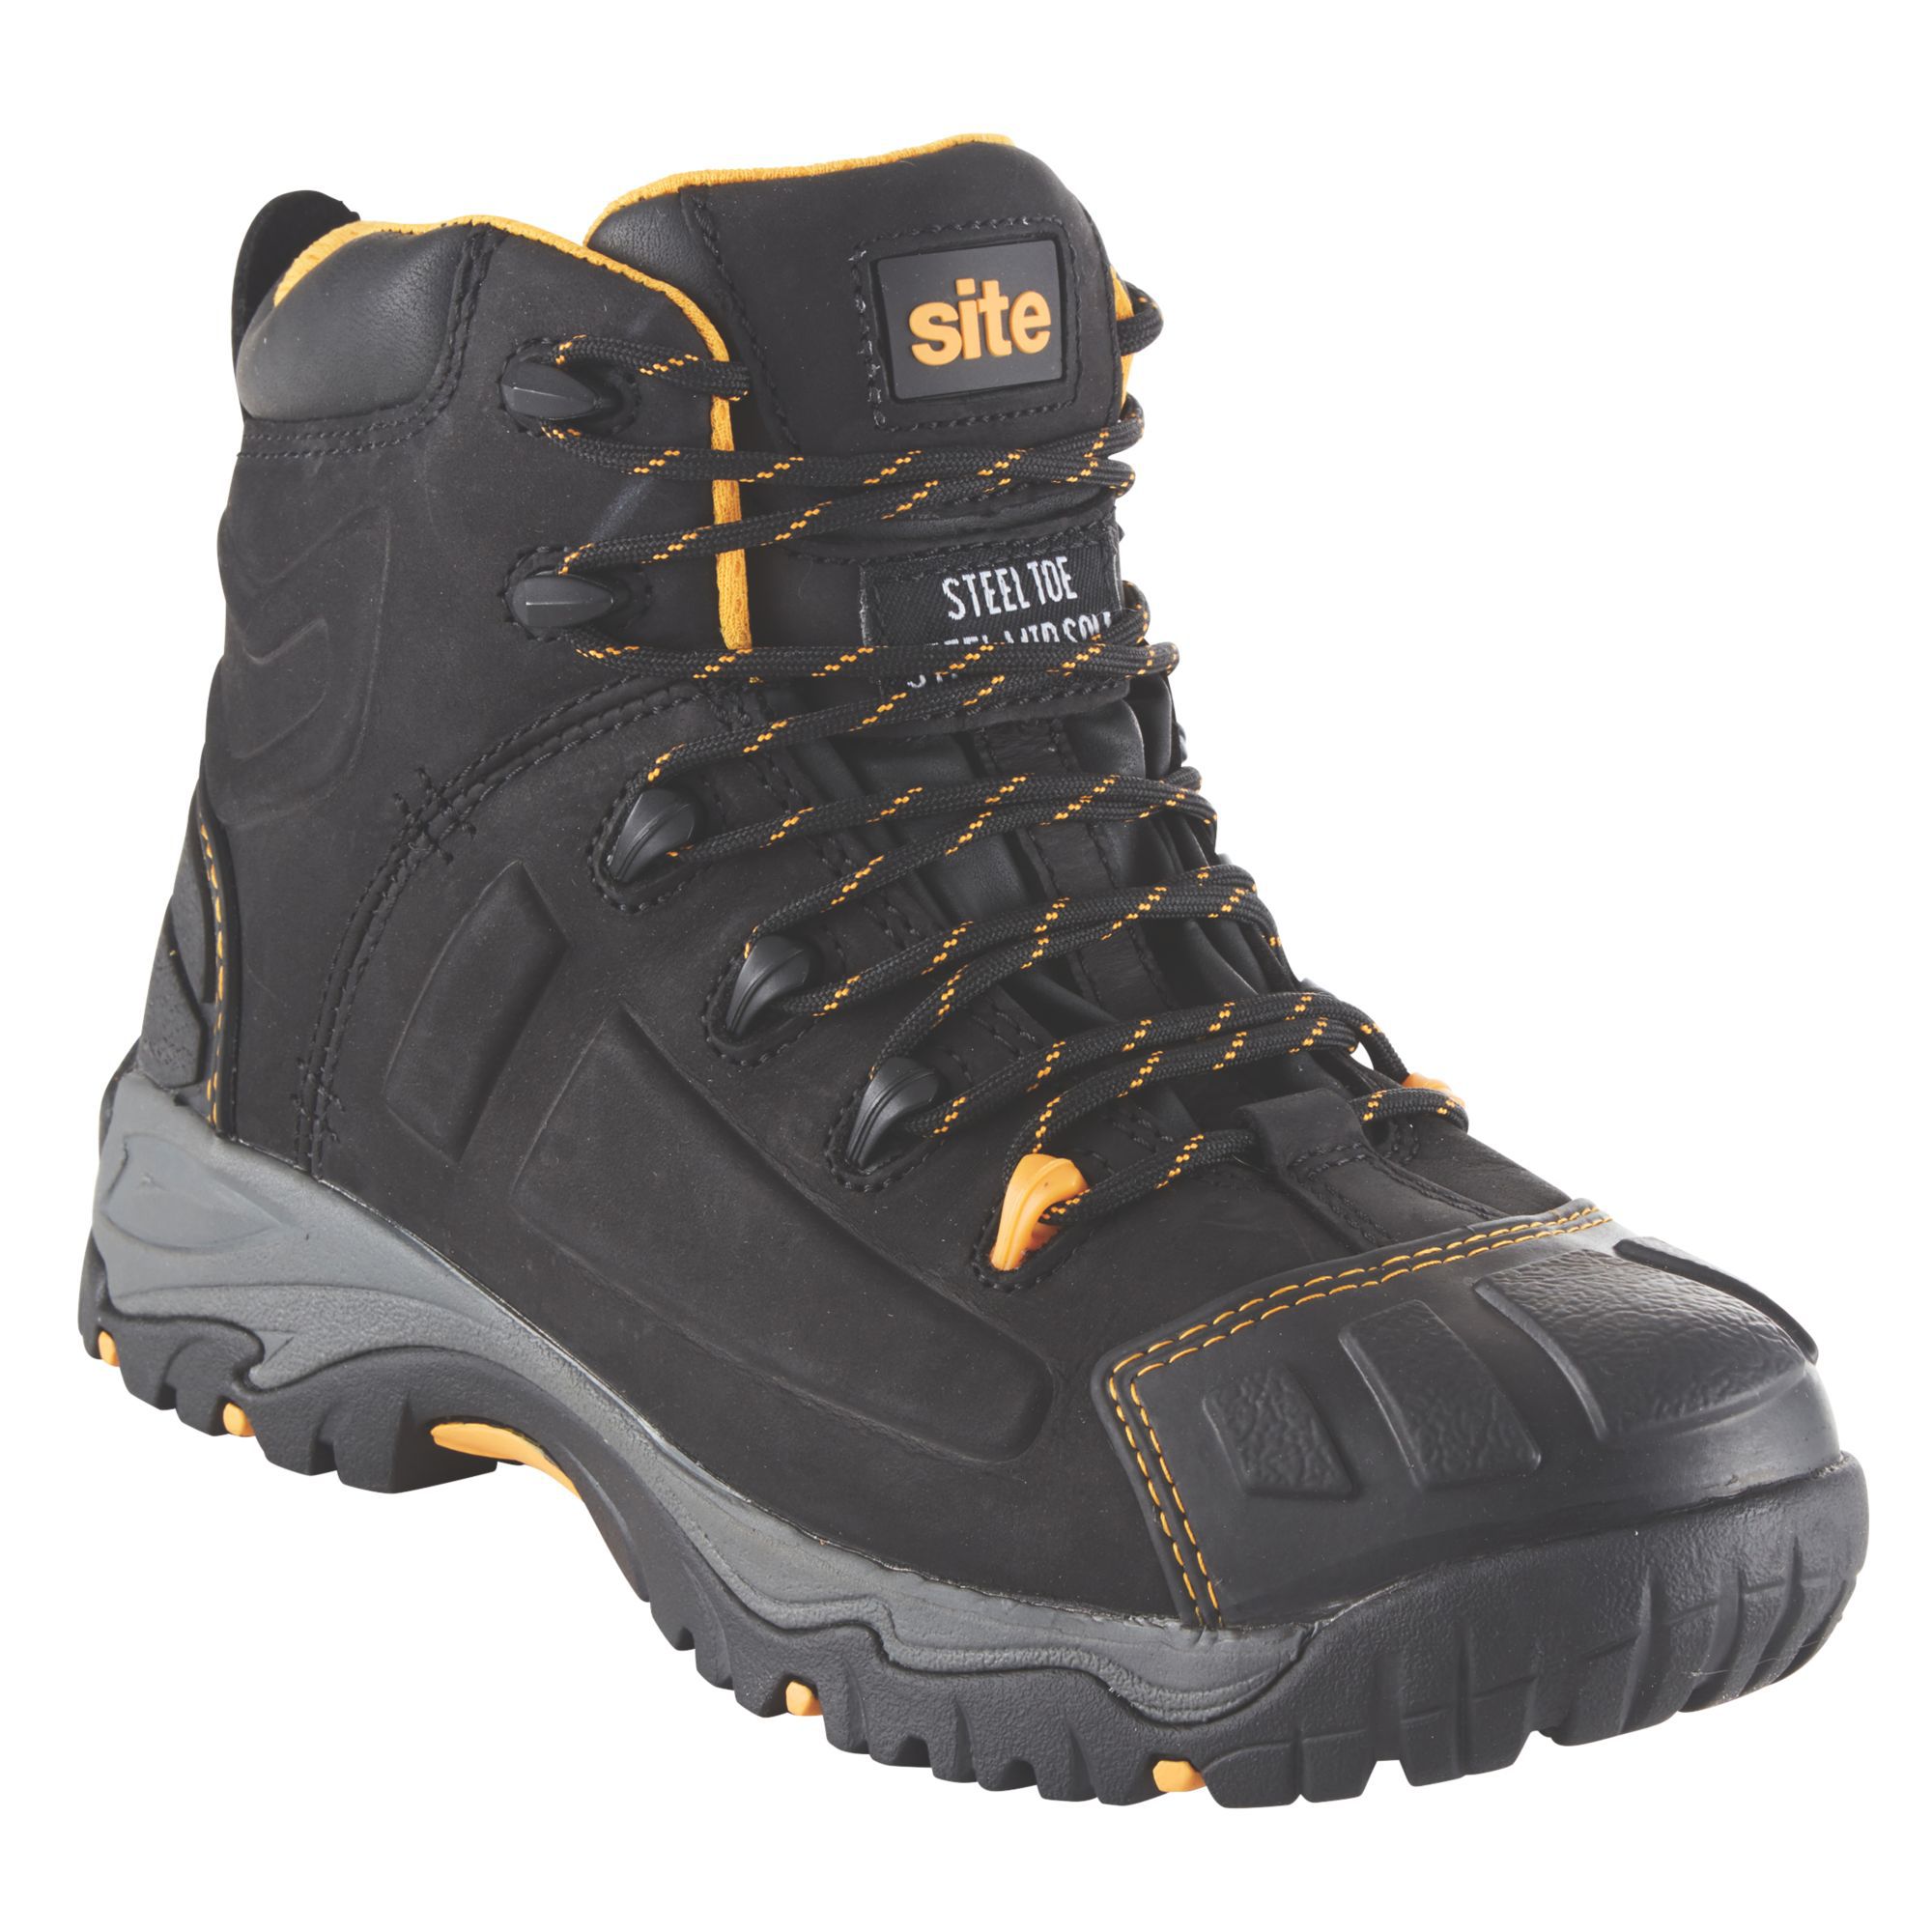 Site Fortress Men's Black Safety boots, Size 8 | Departments | DIY at B&Q